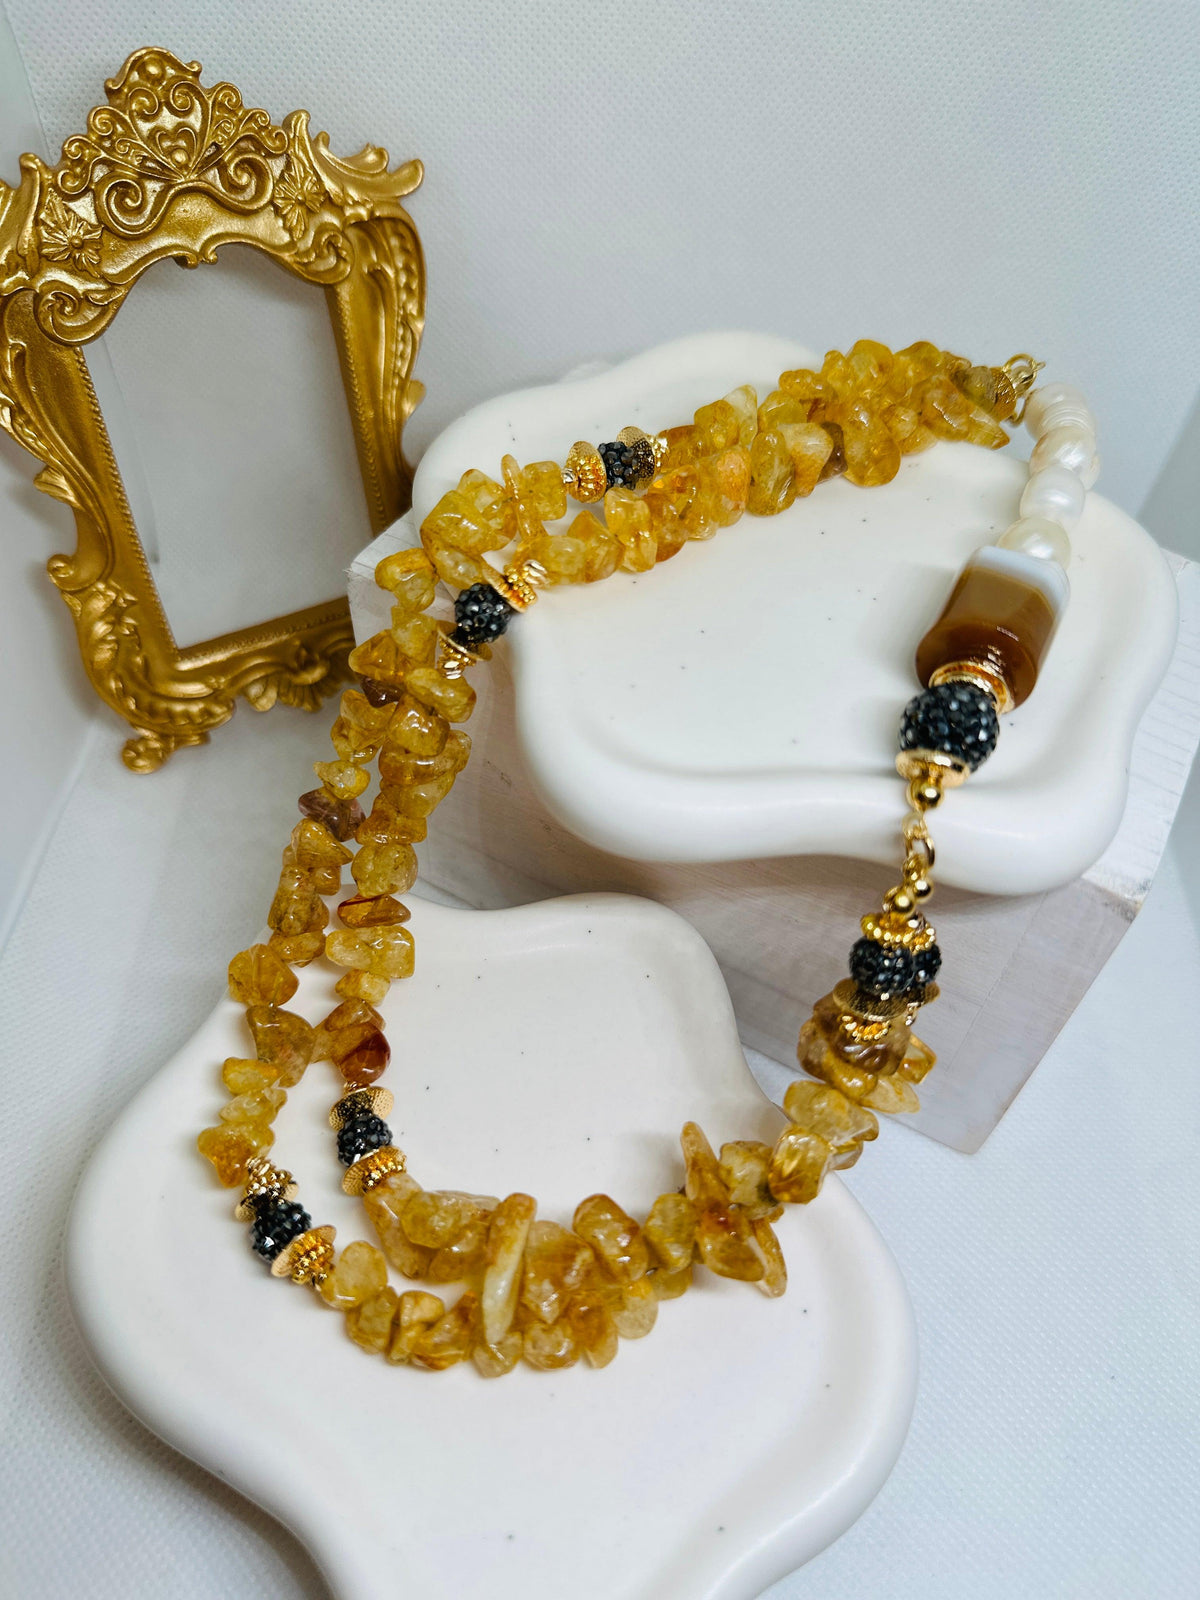 Joelle Amber Gemstones Necklace - Penelope Made This 